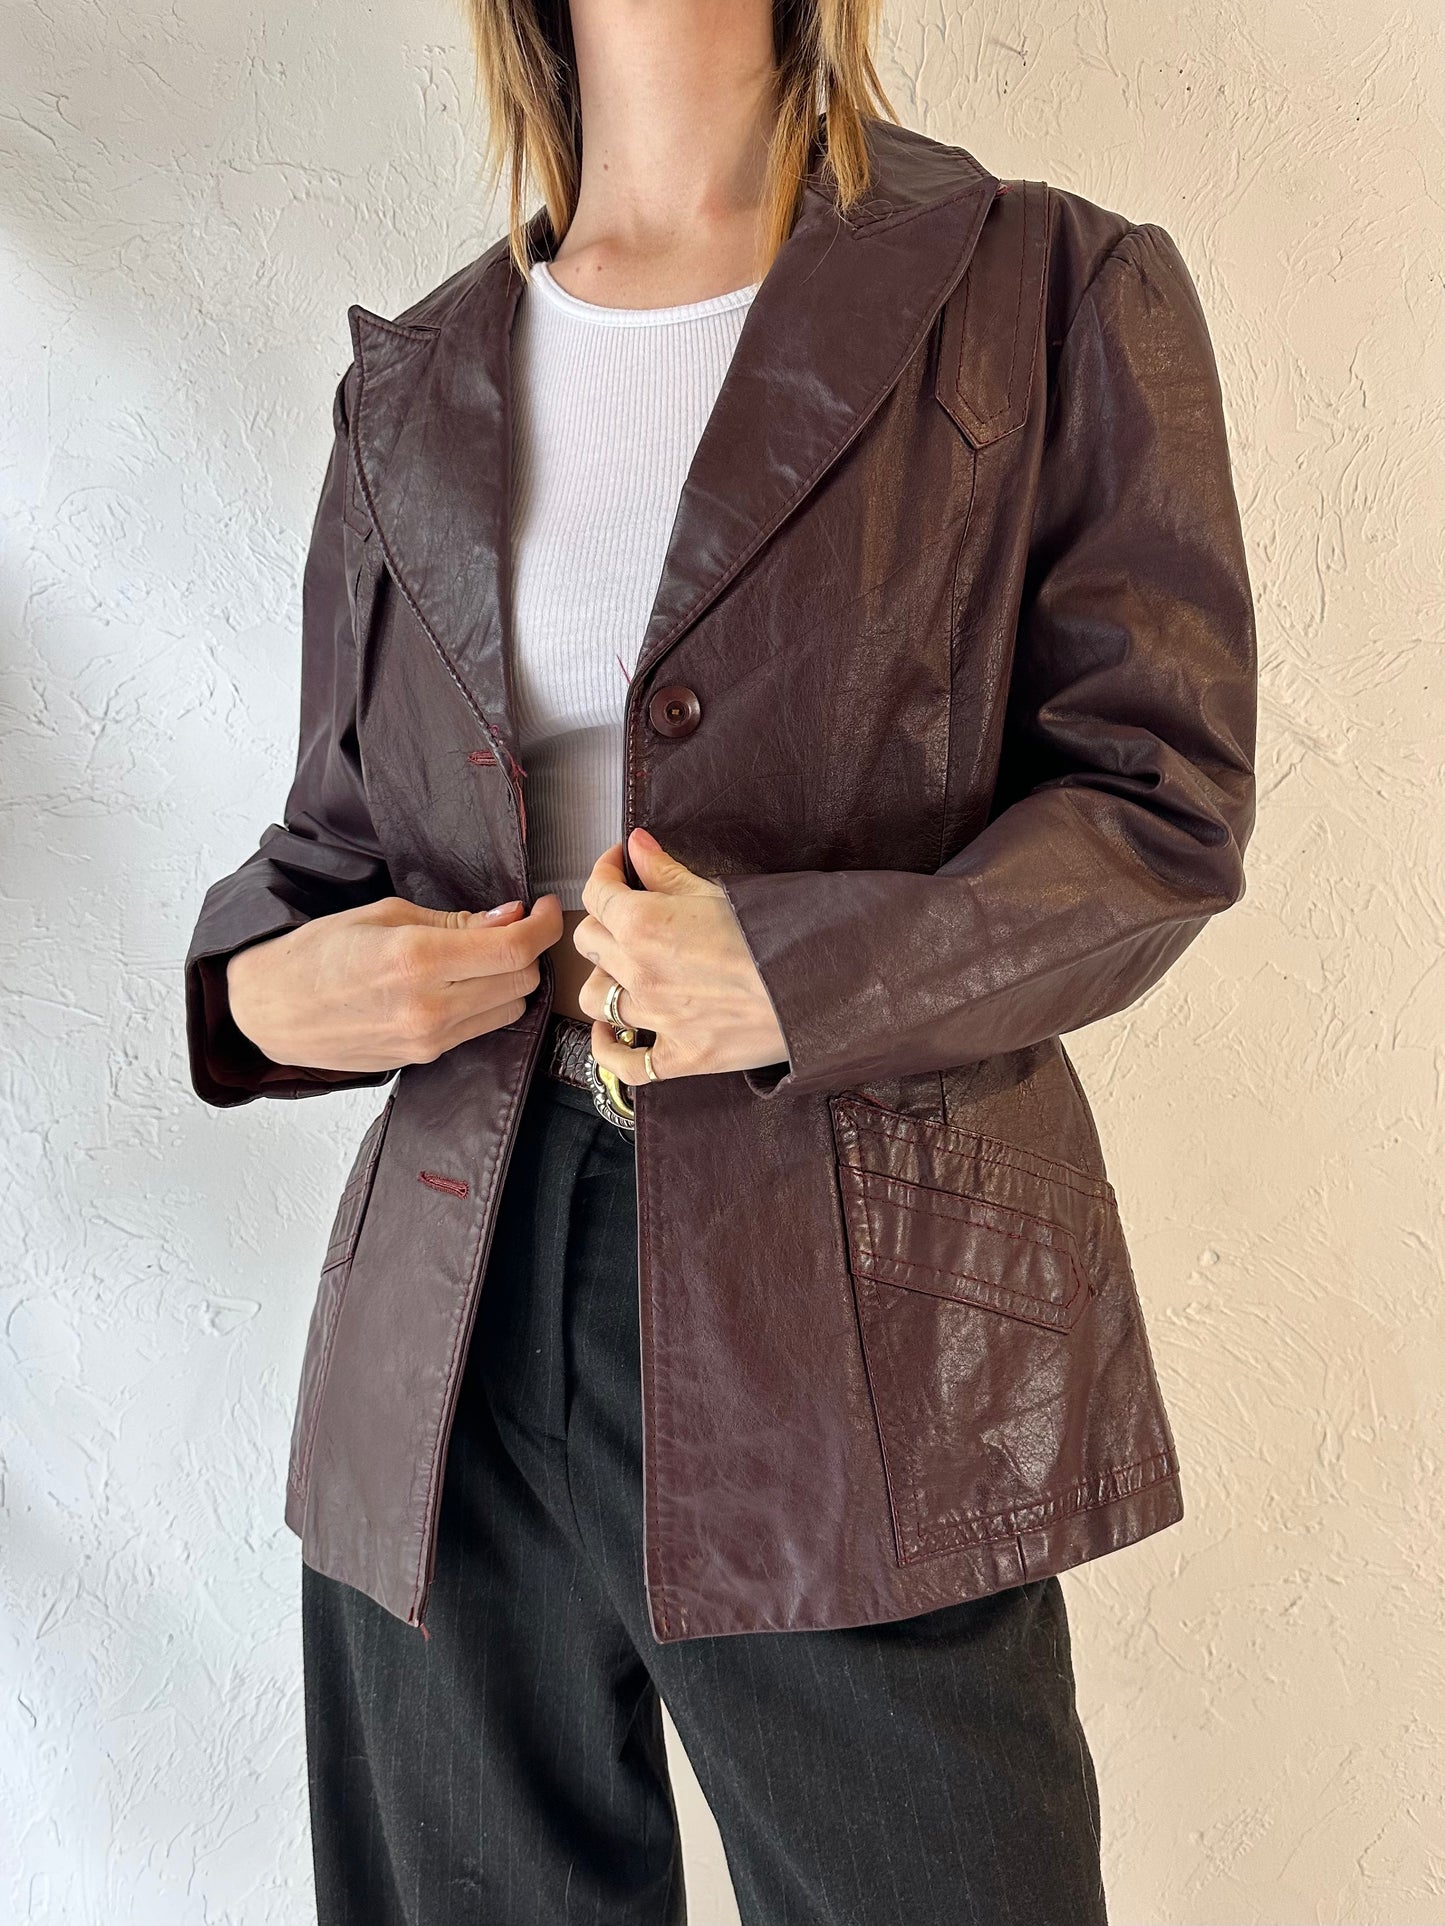 70s 'Genuine Leather' Brown Leather Jacket / Large